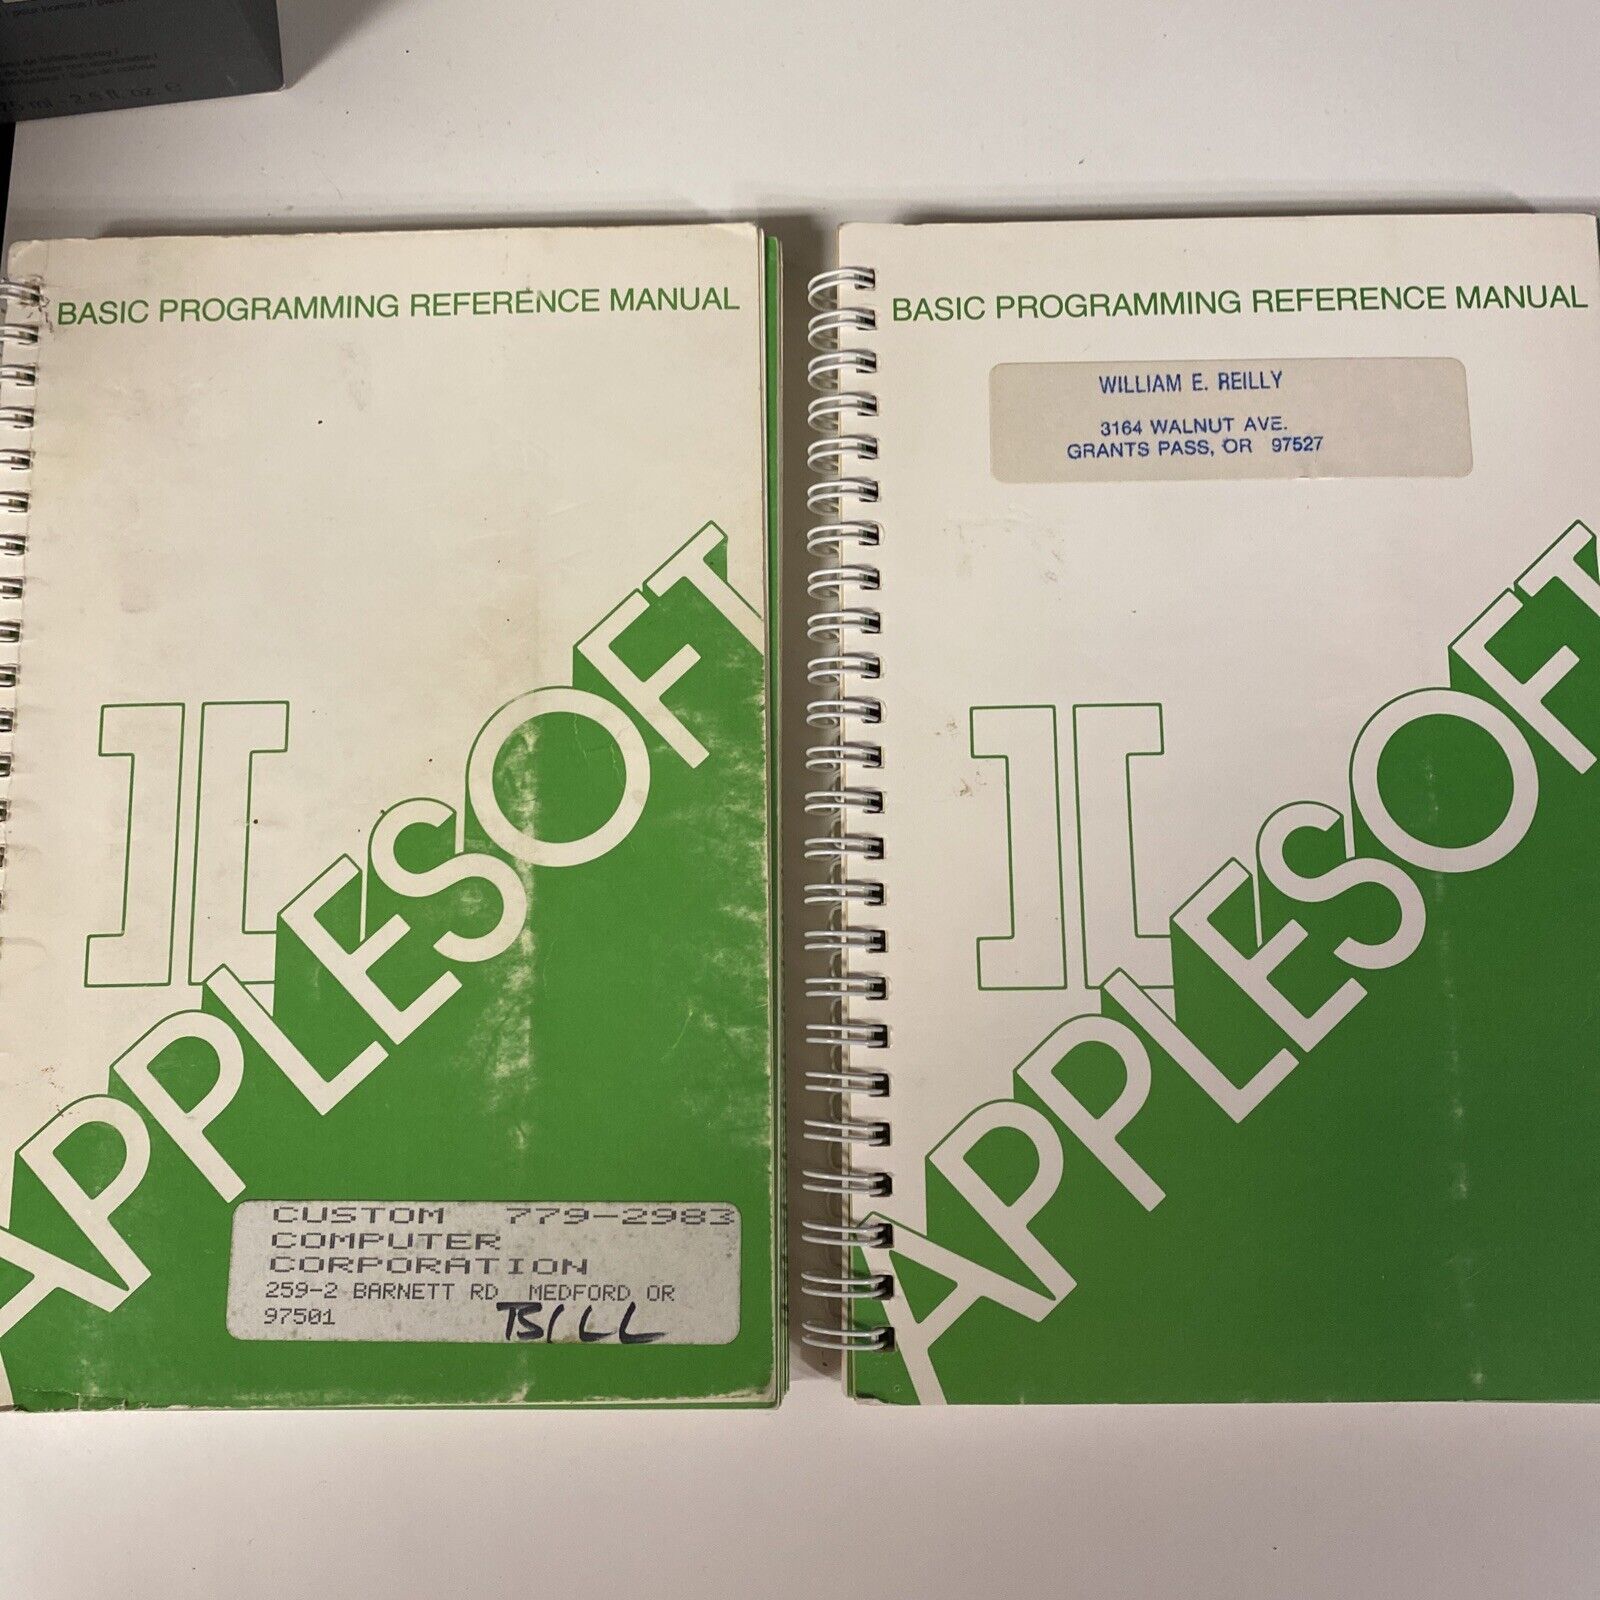 APPLESOFT II BASIC PROGRAMMING REFERENCE MANUAL 1978 Apple Computer w/Guide XLNT